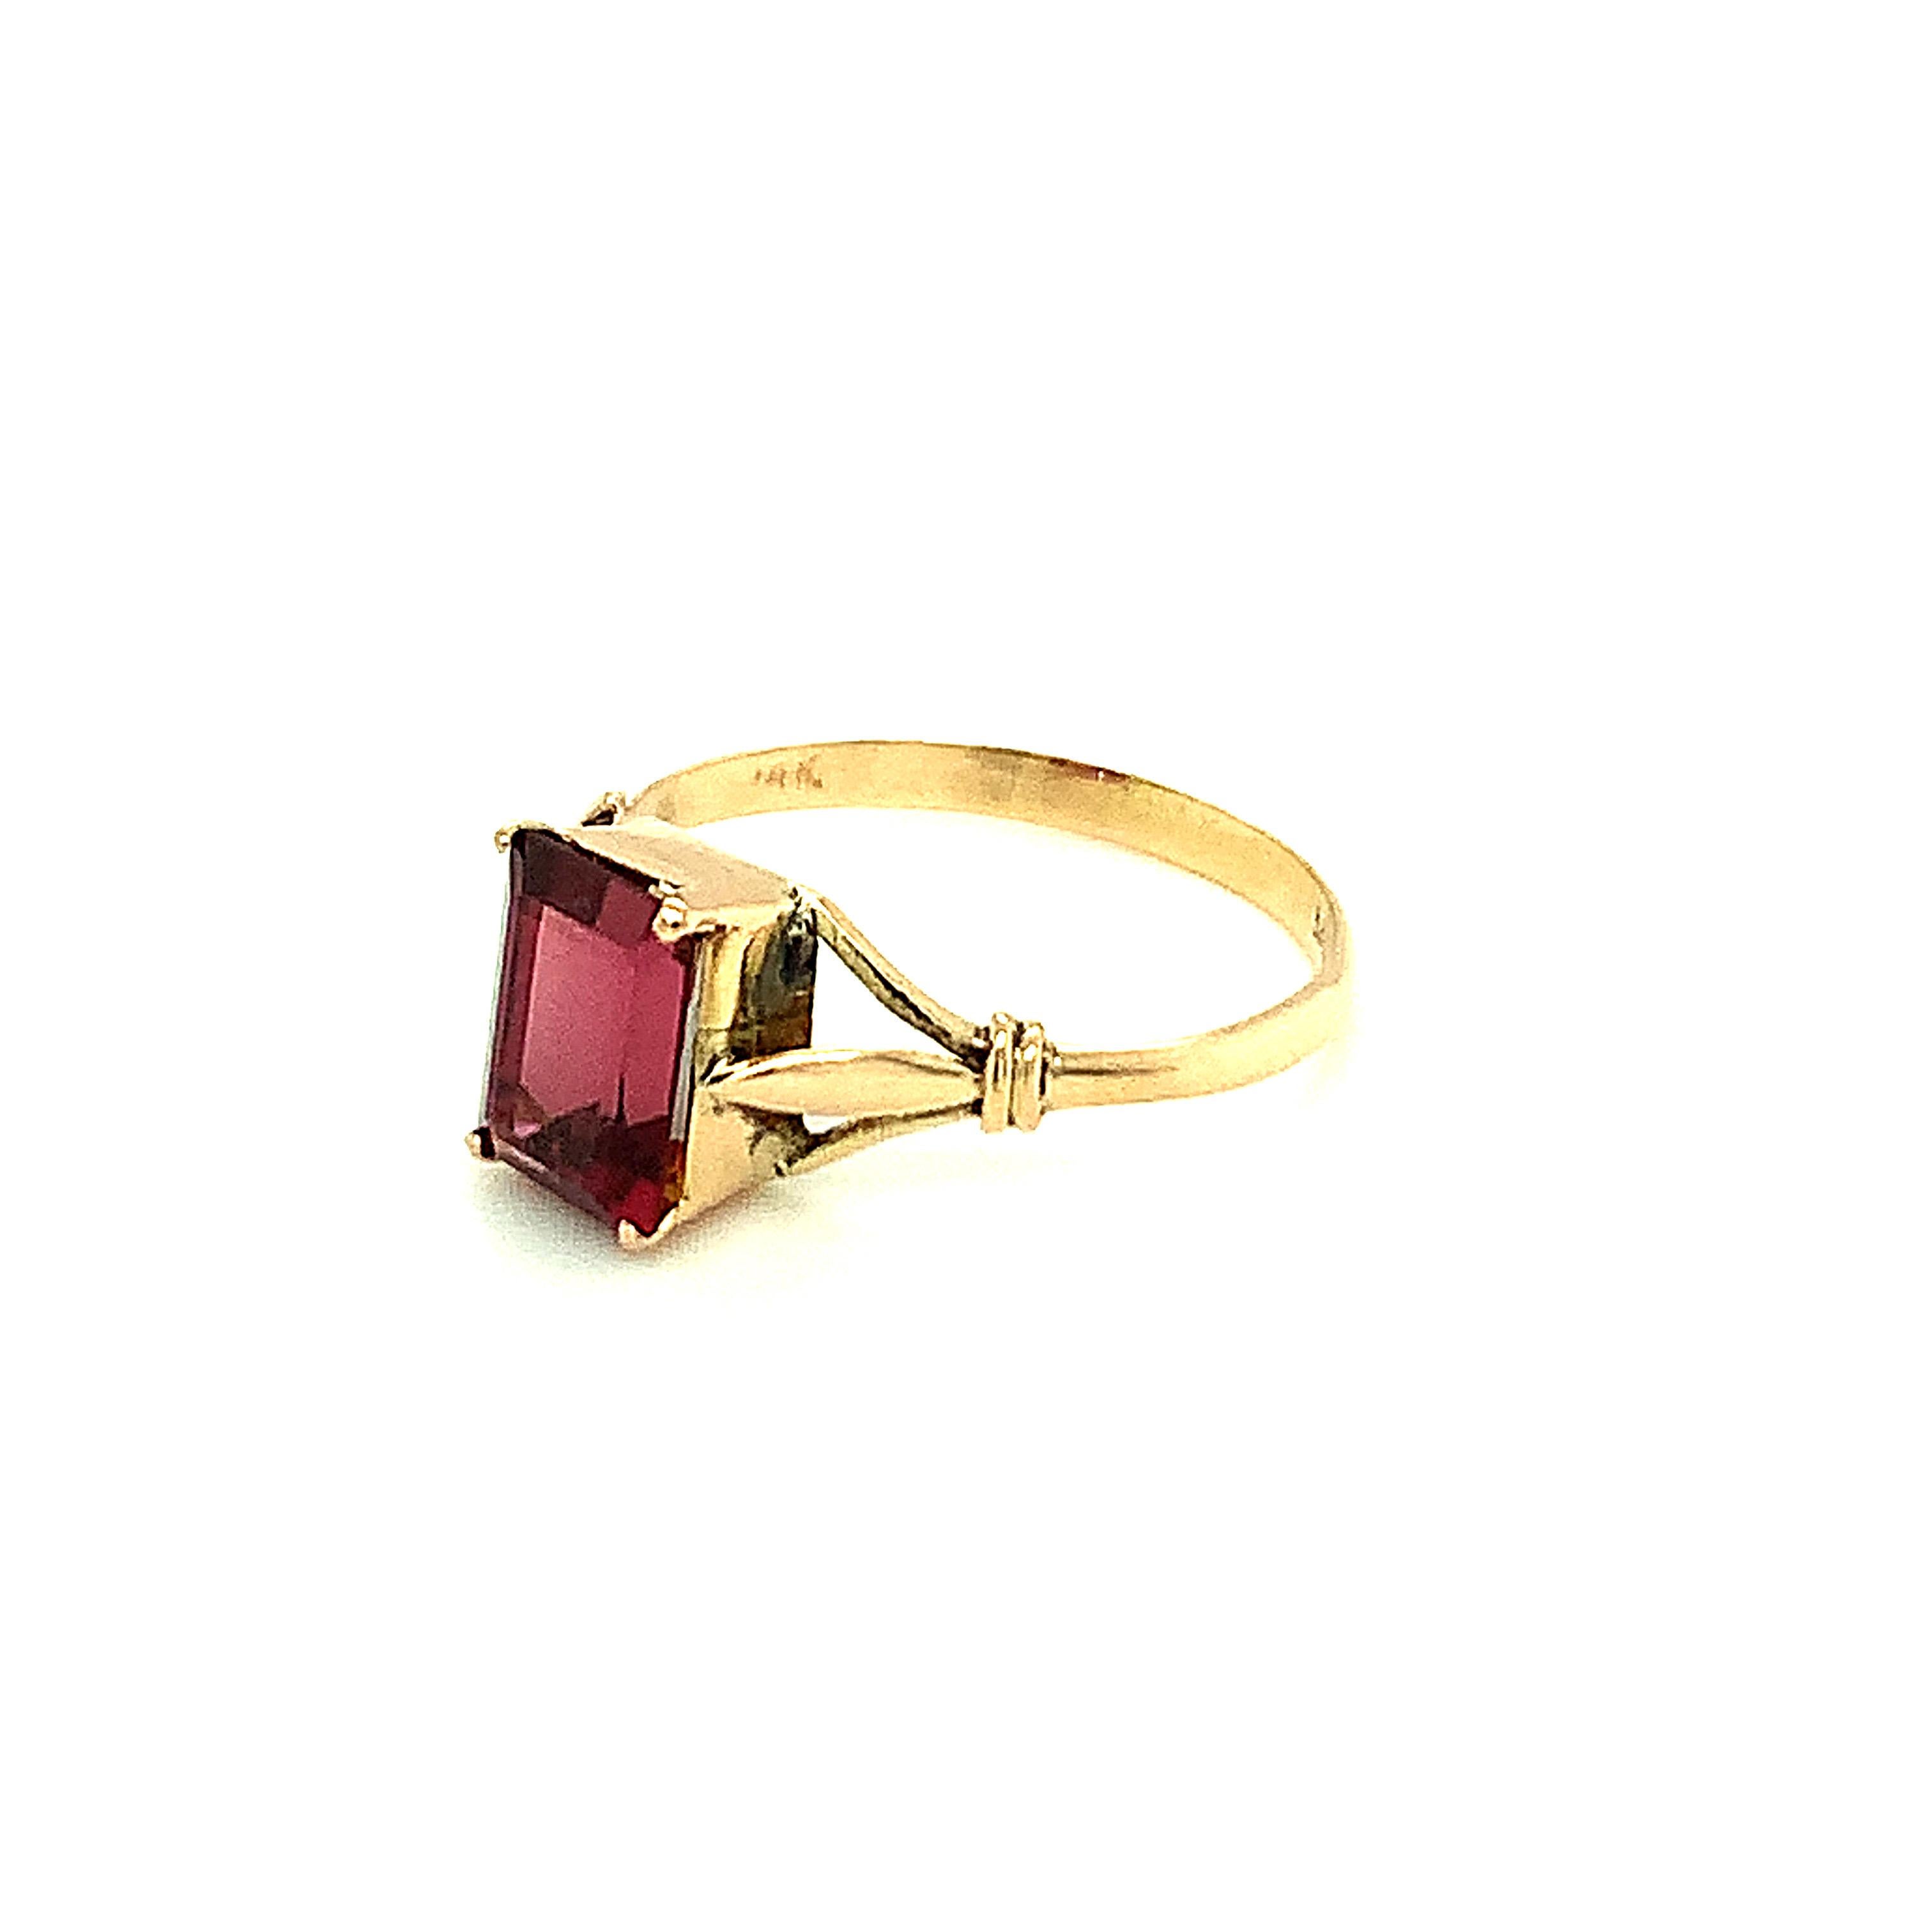 Baguette Cut Garnet 14k Yellow Gold Ring In New Condition For Sale In Trumbull, CT